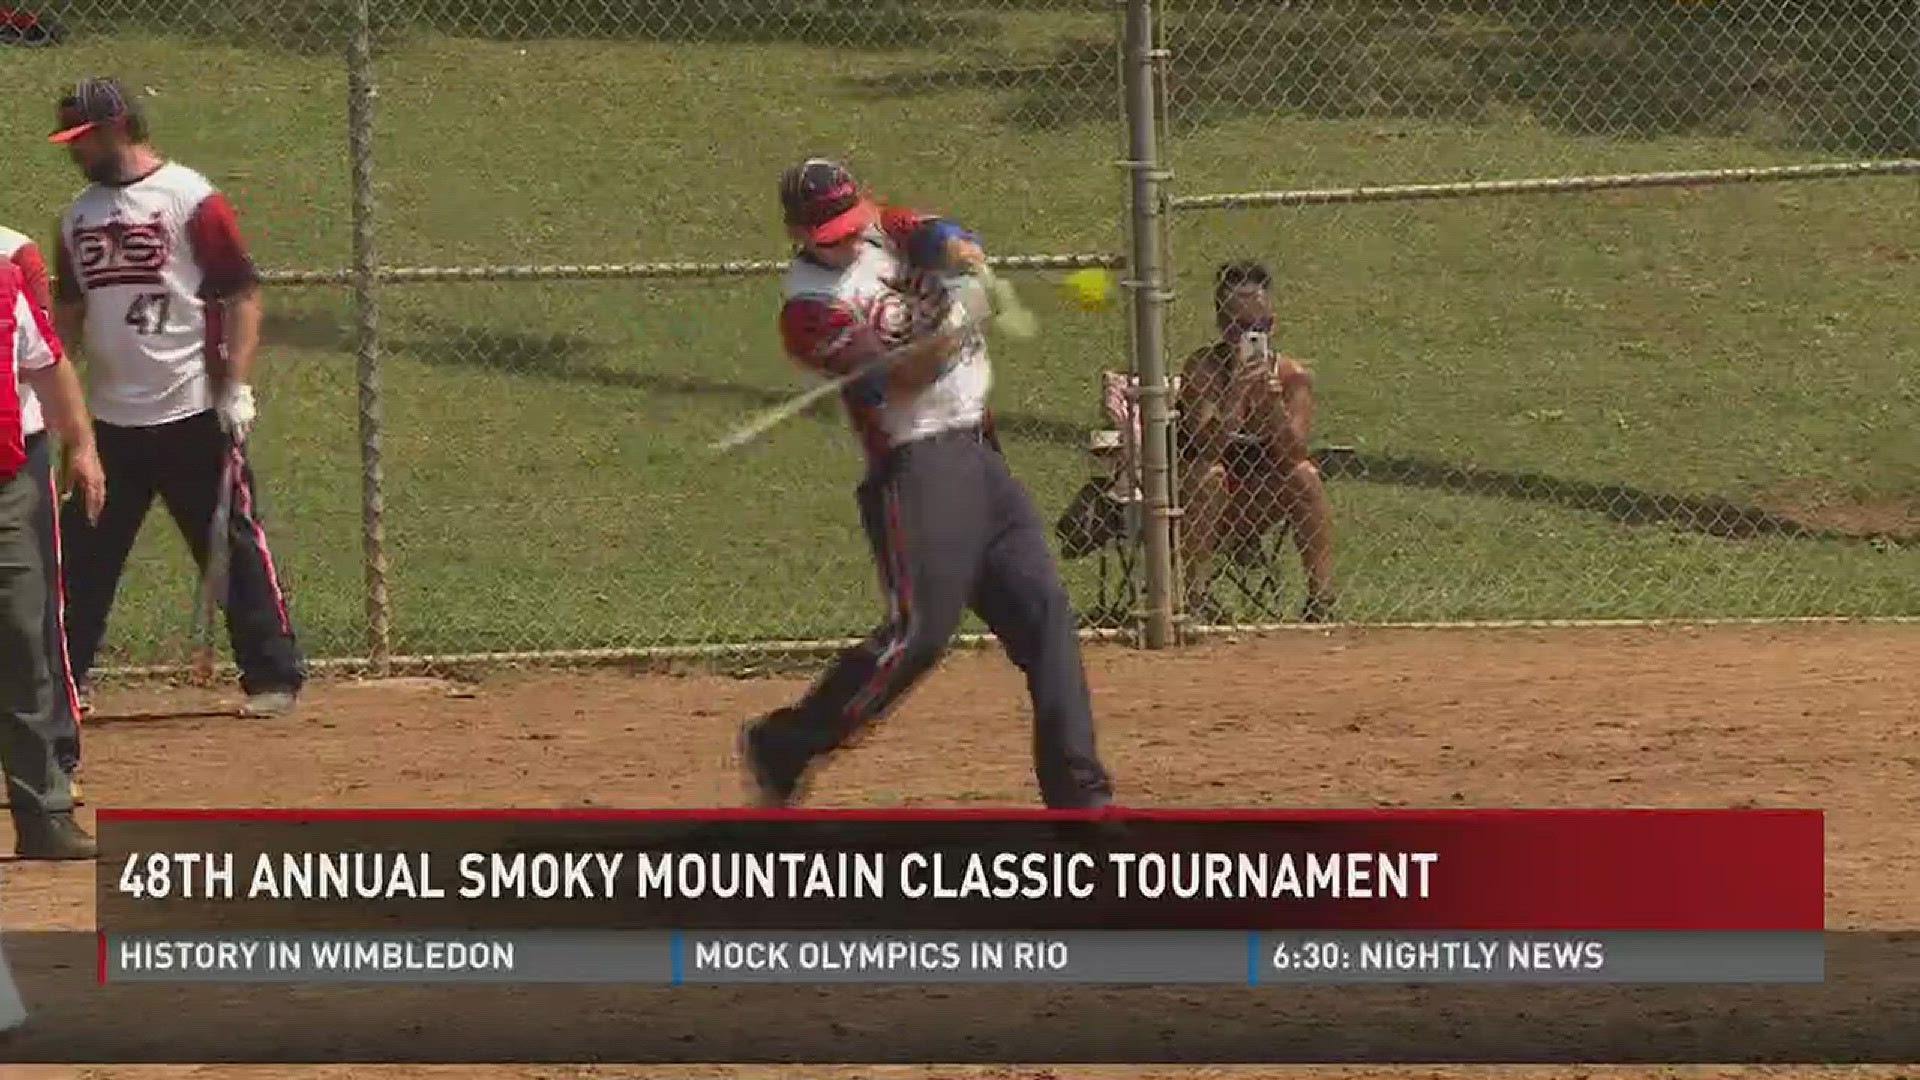 More than 30 of the best softball teams in the country converged on Maryville this weekend for the 48th annual Smoky Mountain Classic.